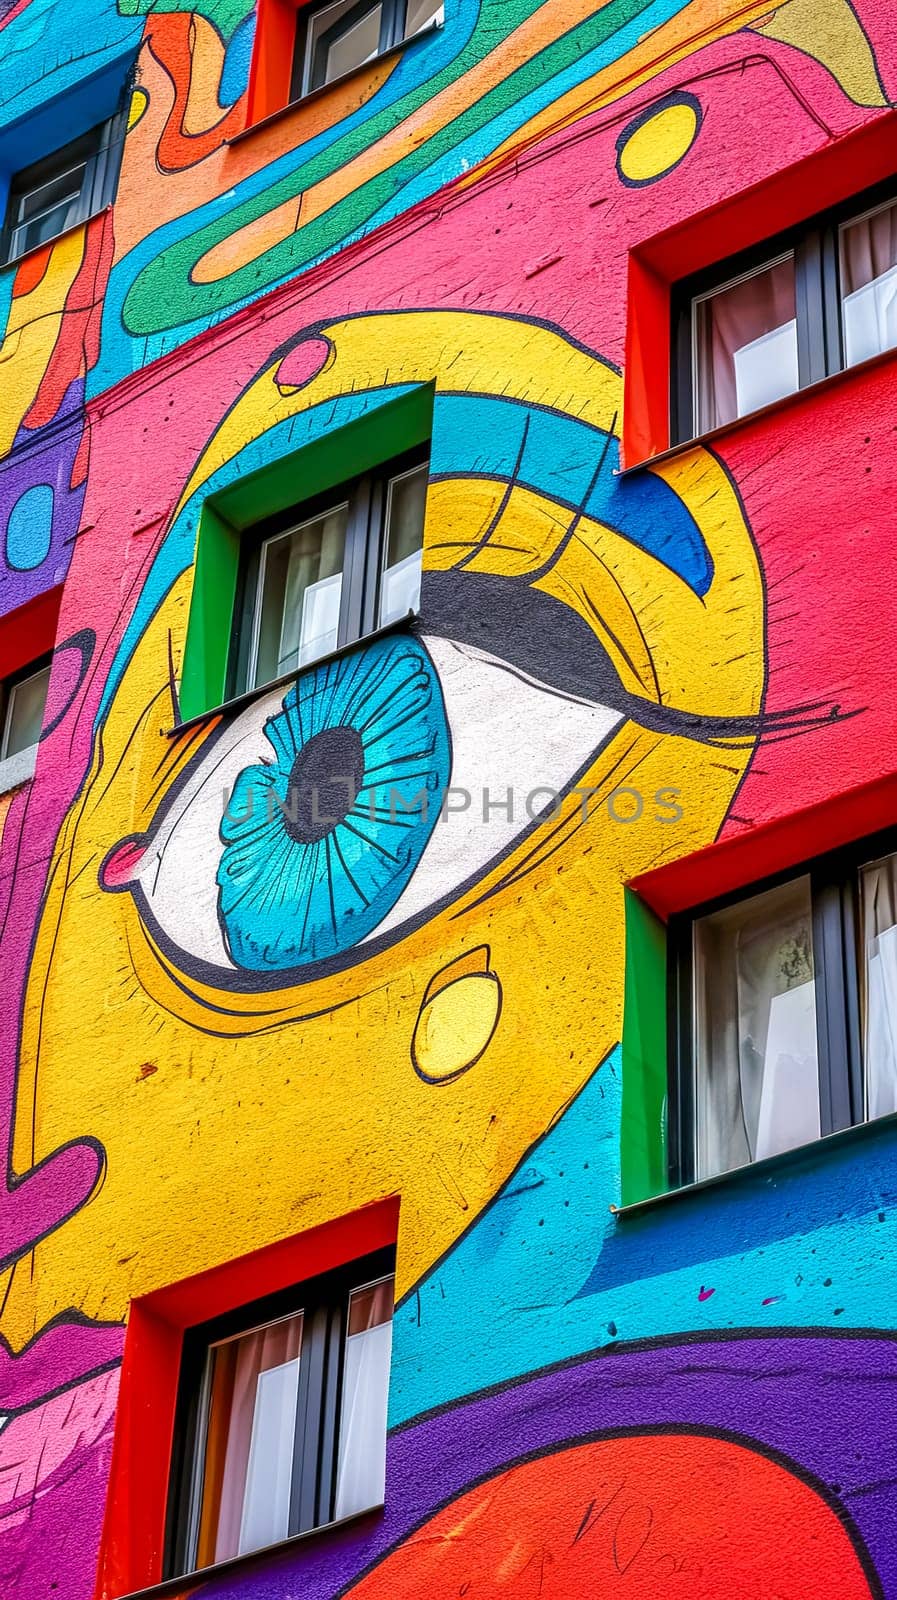 street art mural on an urban building facade, showcasing a large, colorful eye as the centerpiece surrounded by abstract shapes and patterns by Edophoto